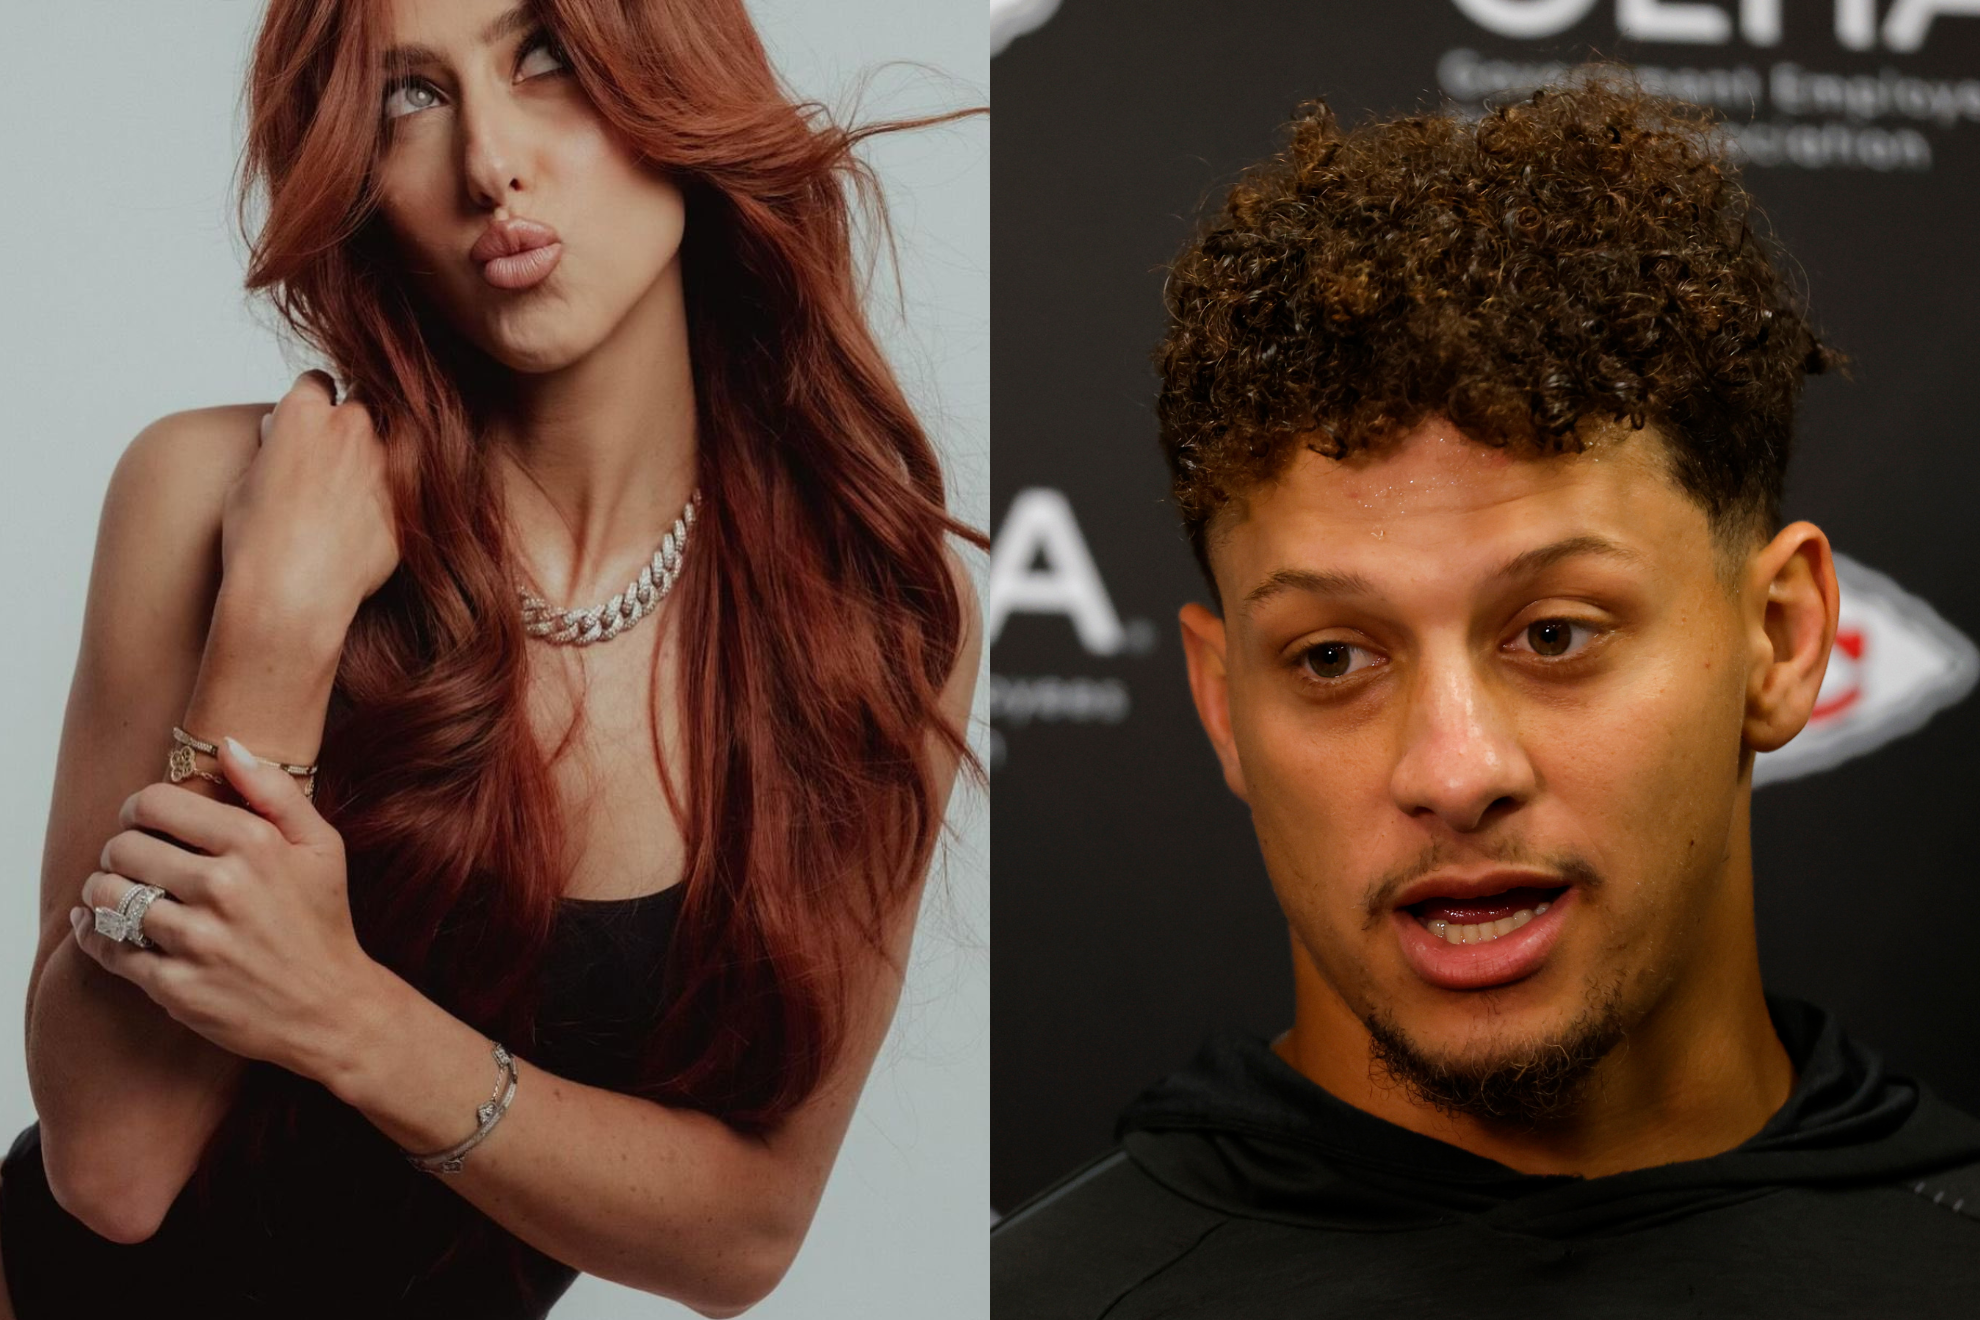 Patrick Mahomes had a dry reaction to Brittanys new hair color: Where is the love?